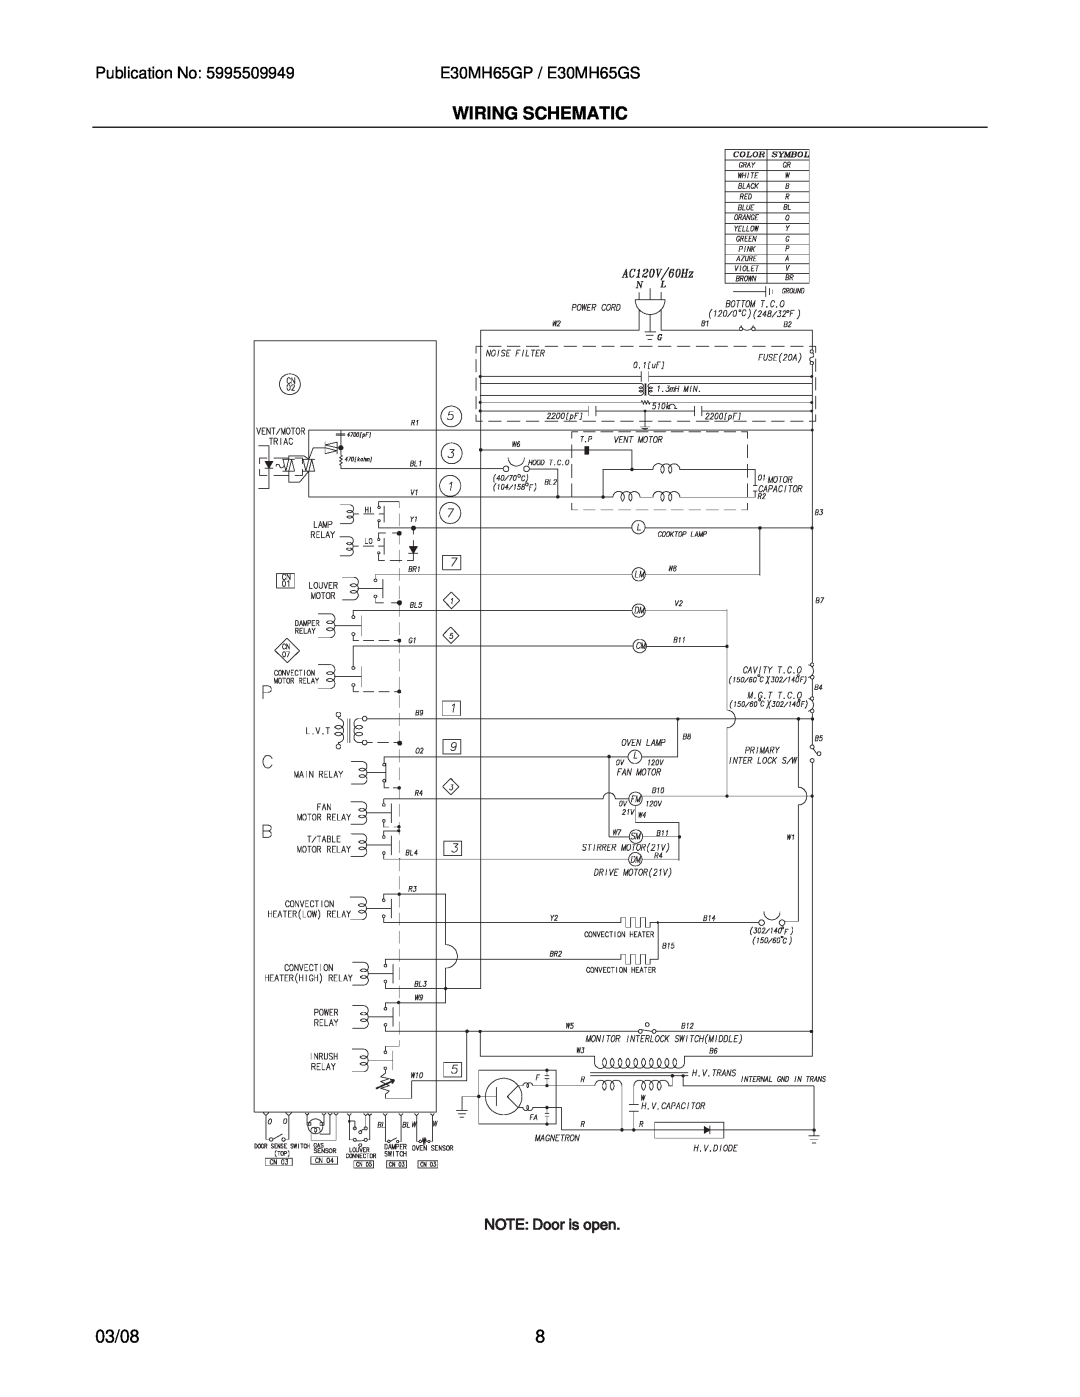 Electrolux E30MH65GSSA, E30MH65GPSA installation instructions Wiring Schematic, 03/08 